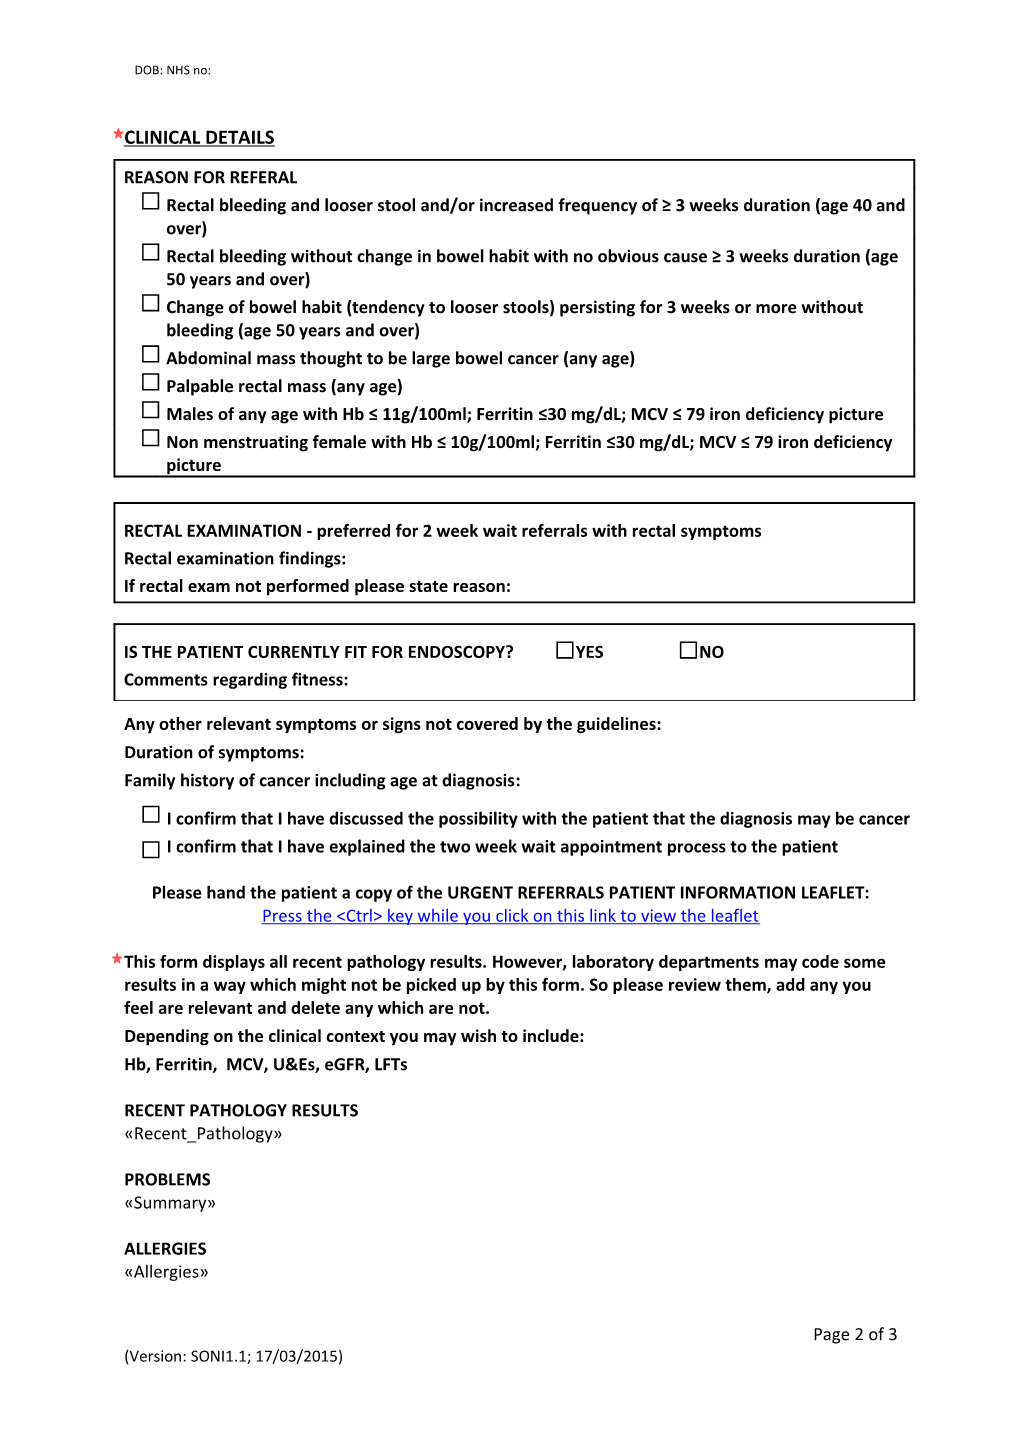 Colorectal 2 Week Referral Form s2